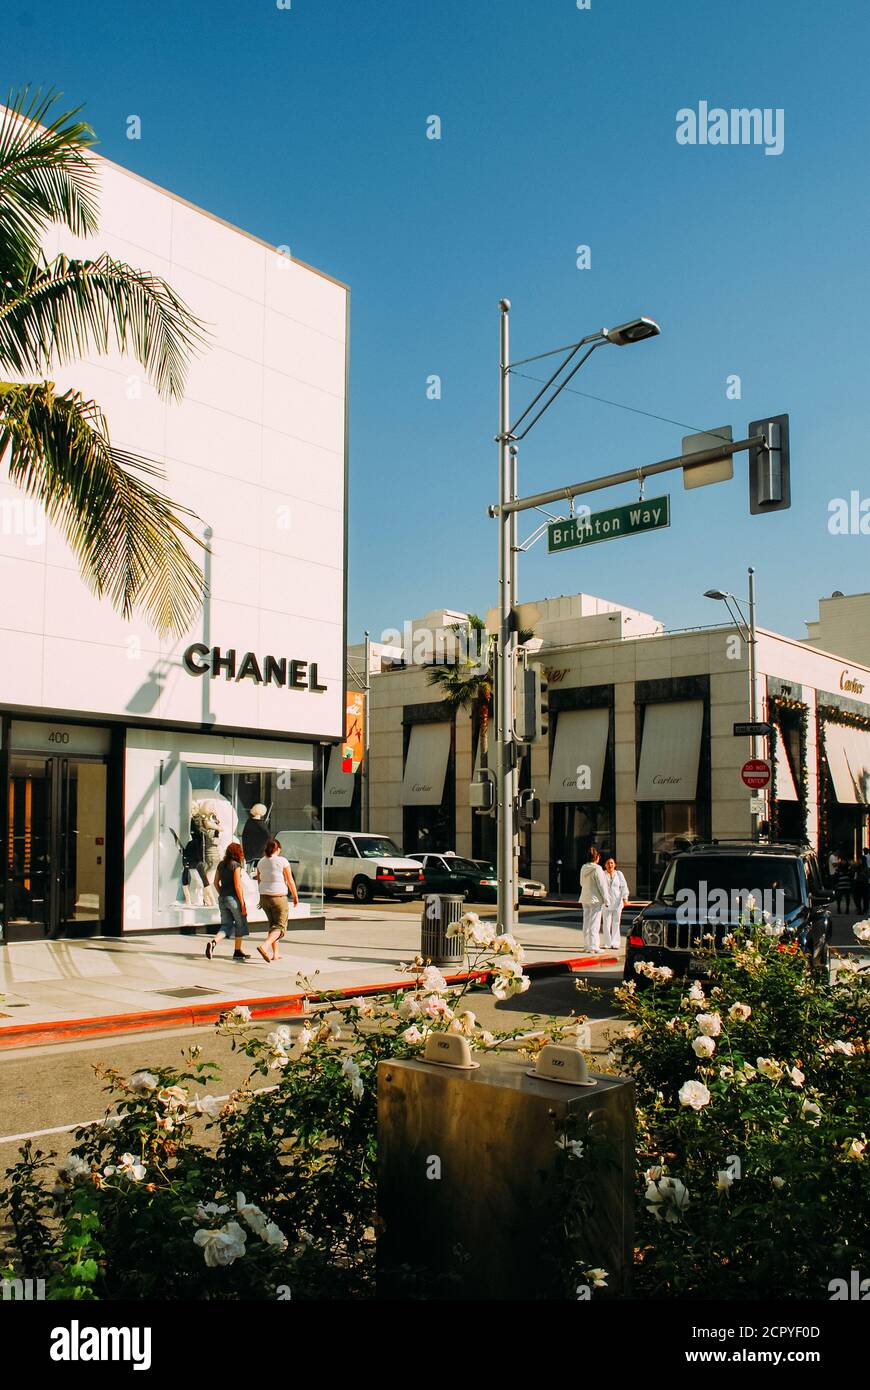 USA, California, Los Angeles, boutiques on famous Rodeo Drive, Chanel and Cartier boutique Stock Photo